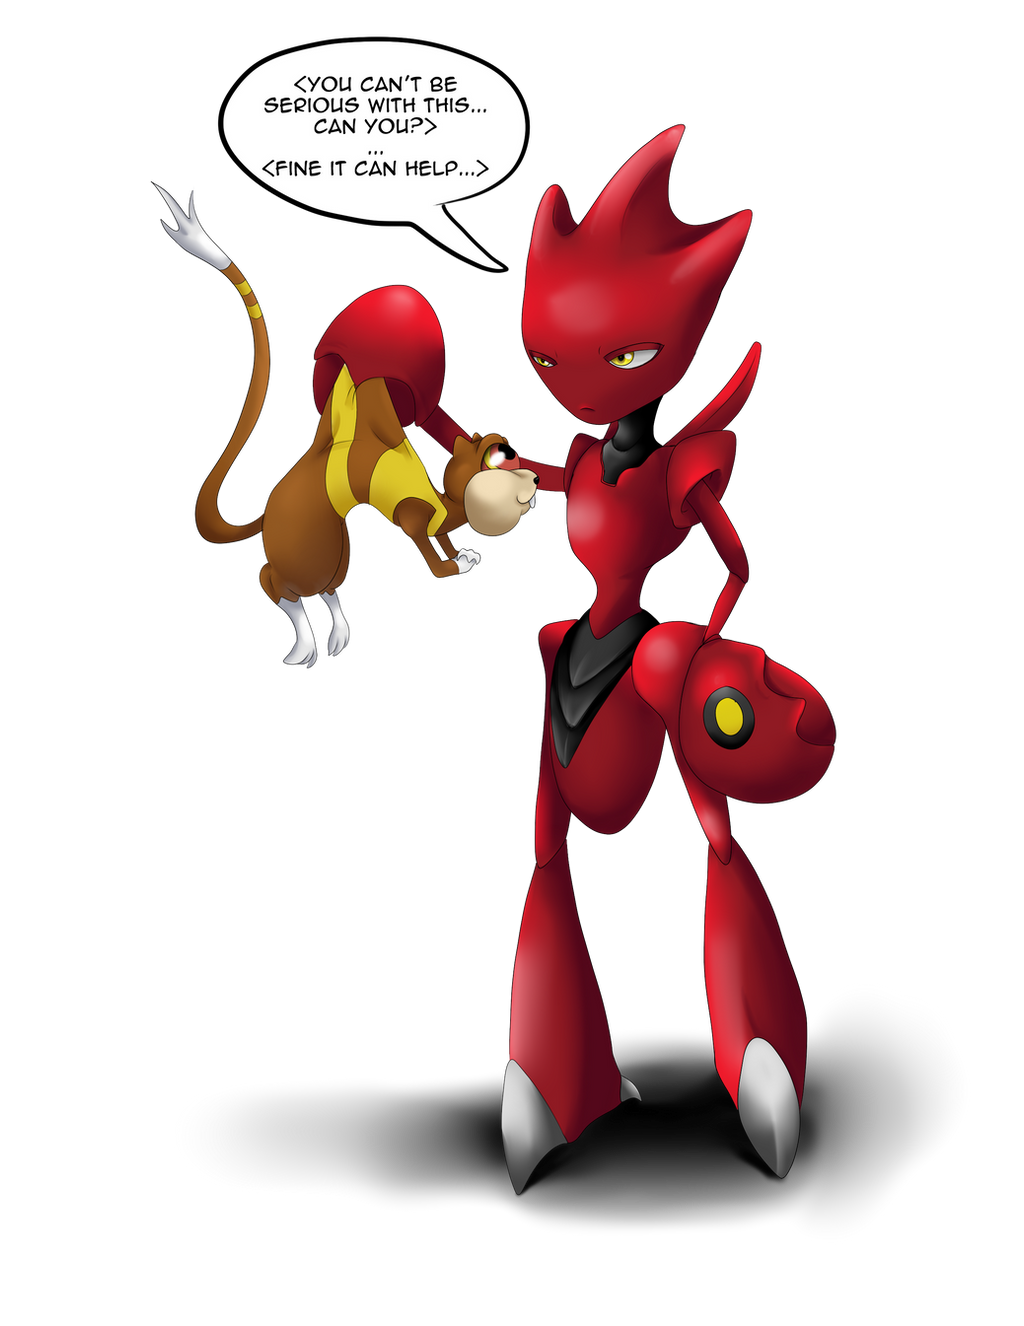 Watchog with scizor is scary